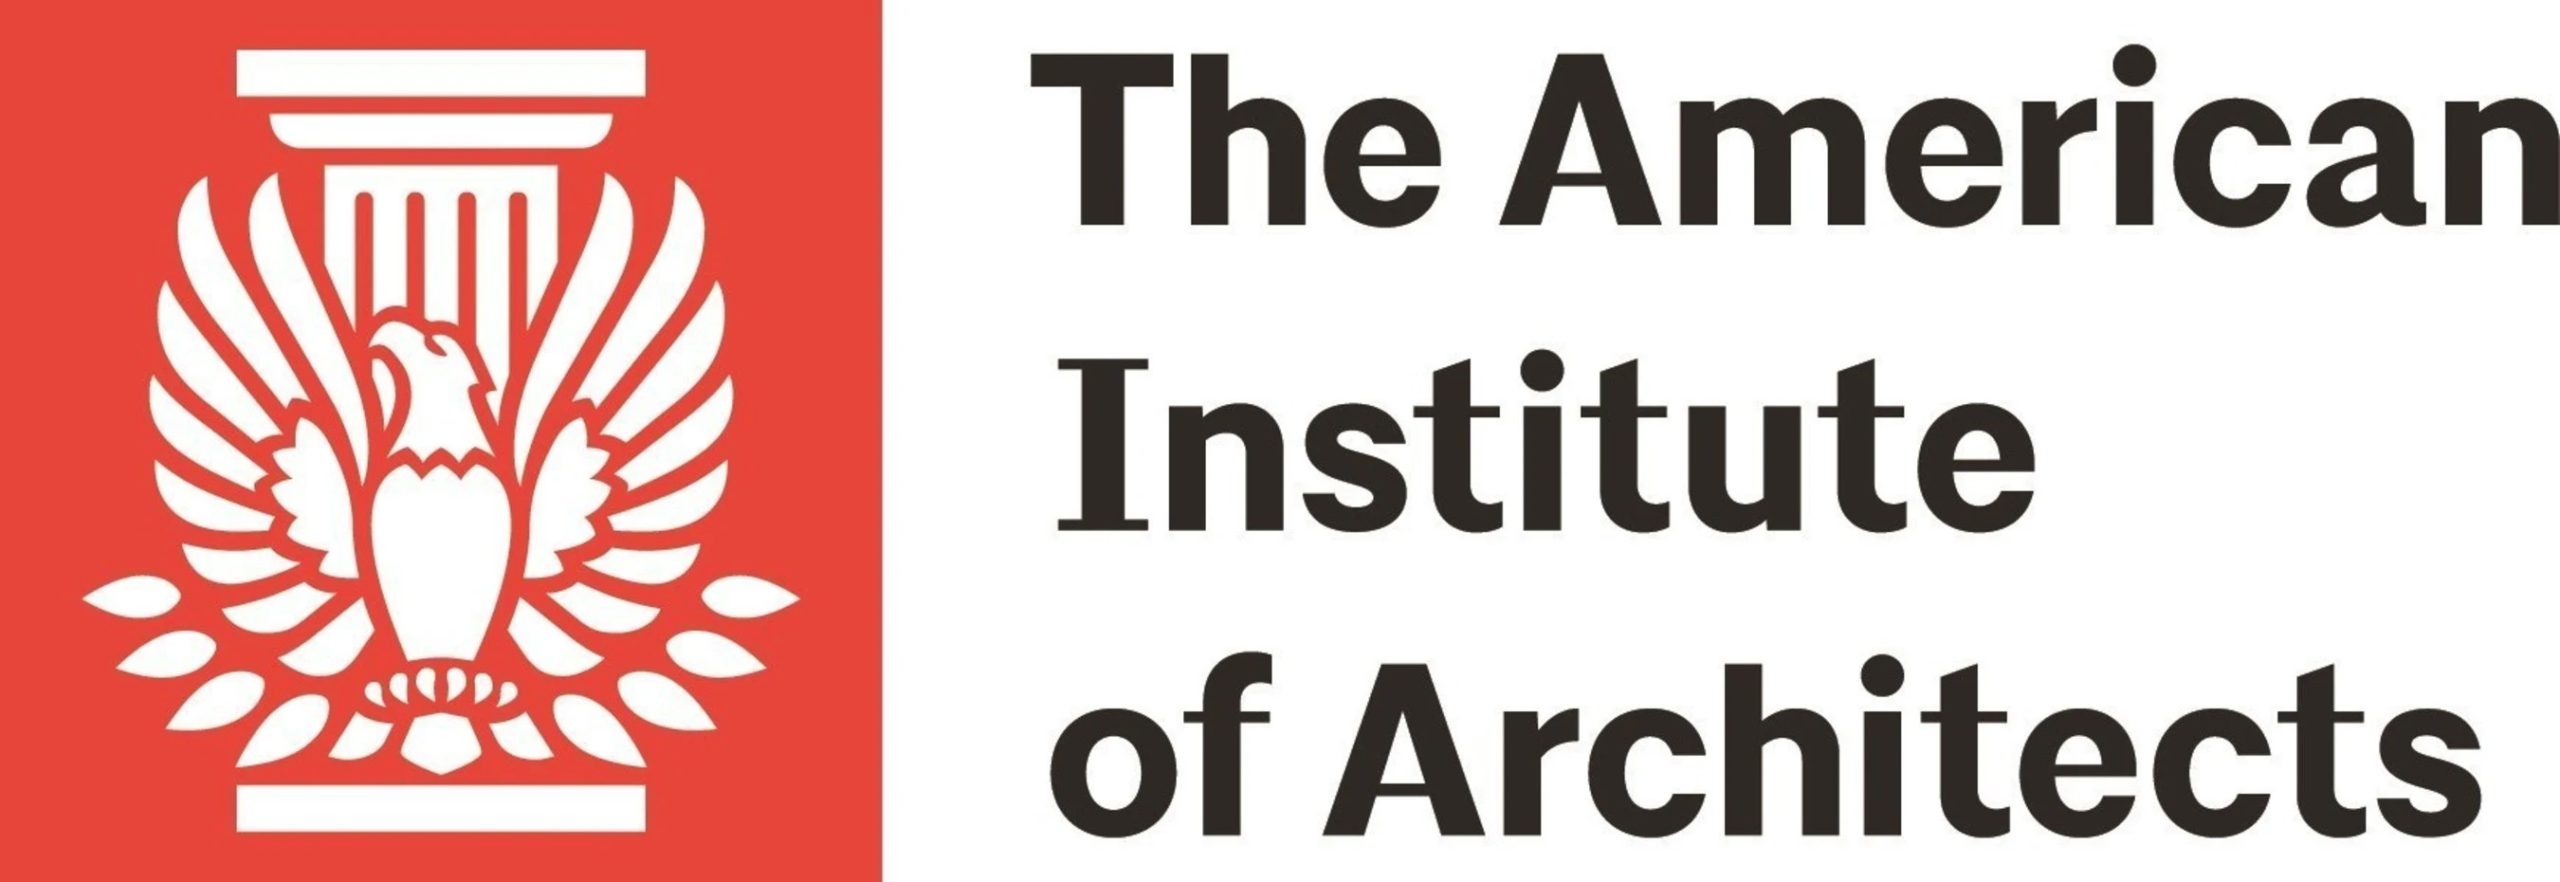 the-american-institute-of-architects